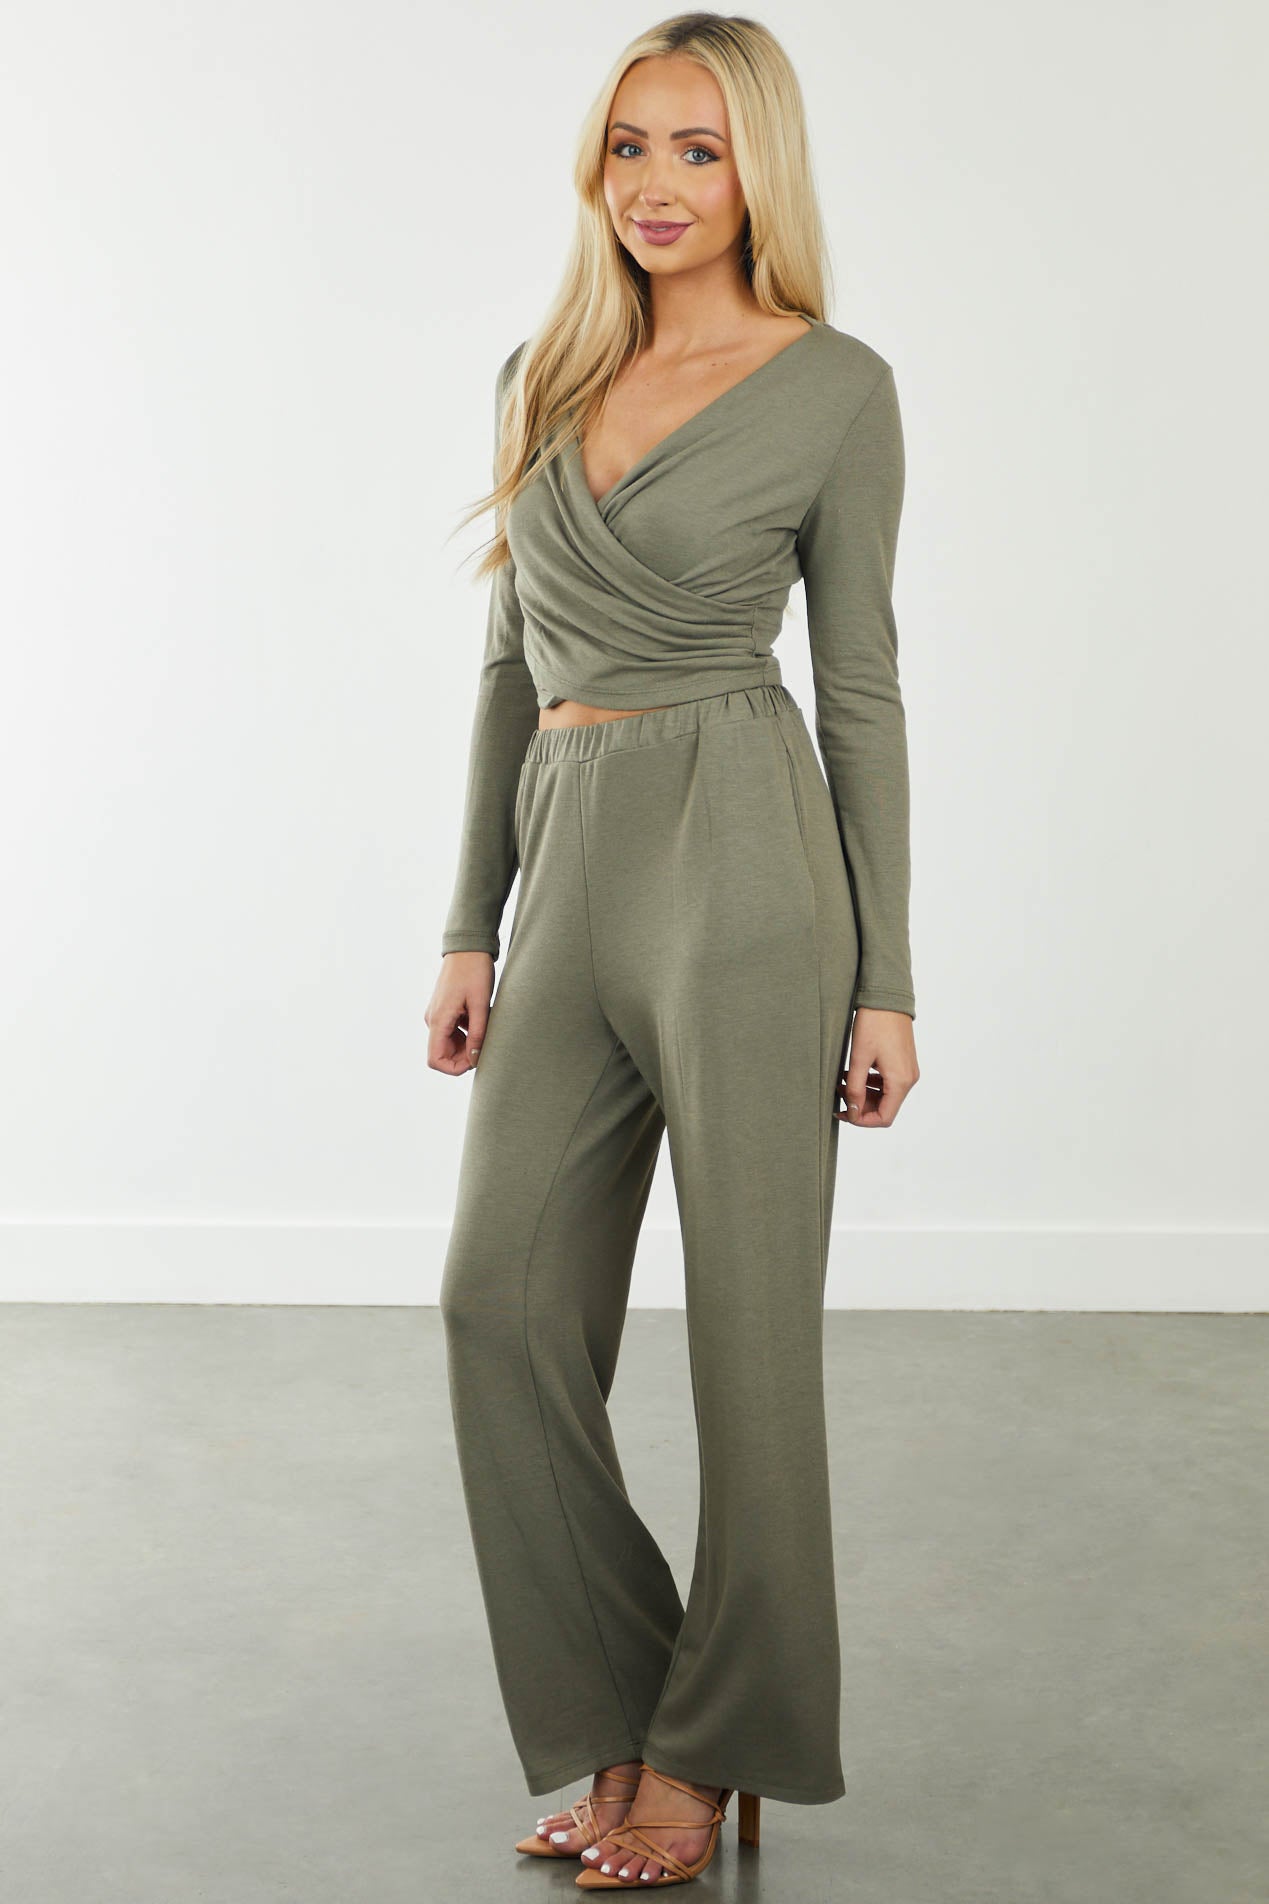 Faded Olive Knit Wrap Top and Loose Pants Set